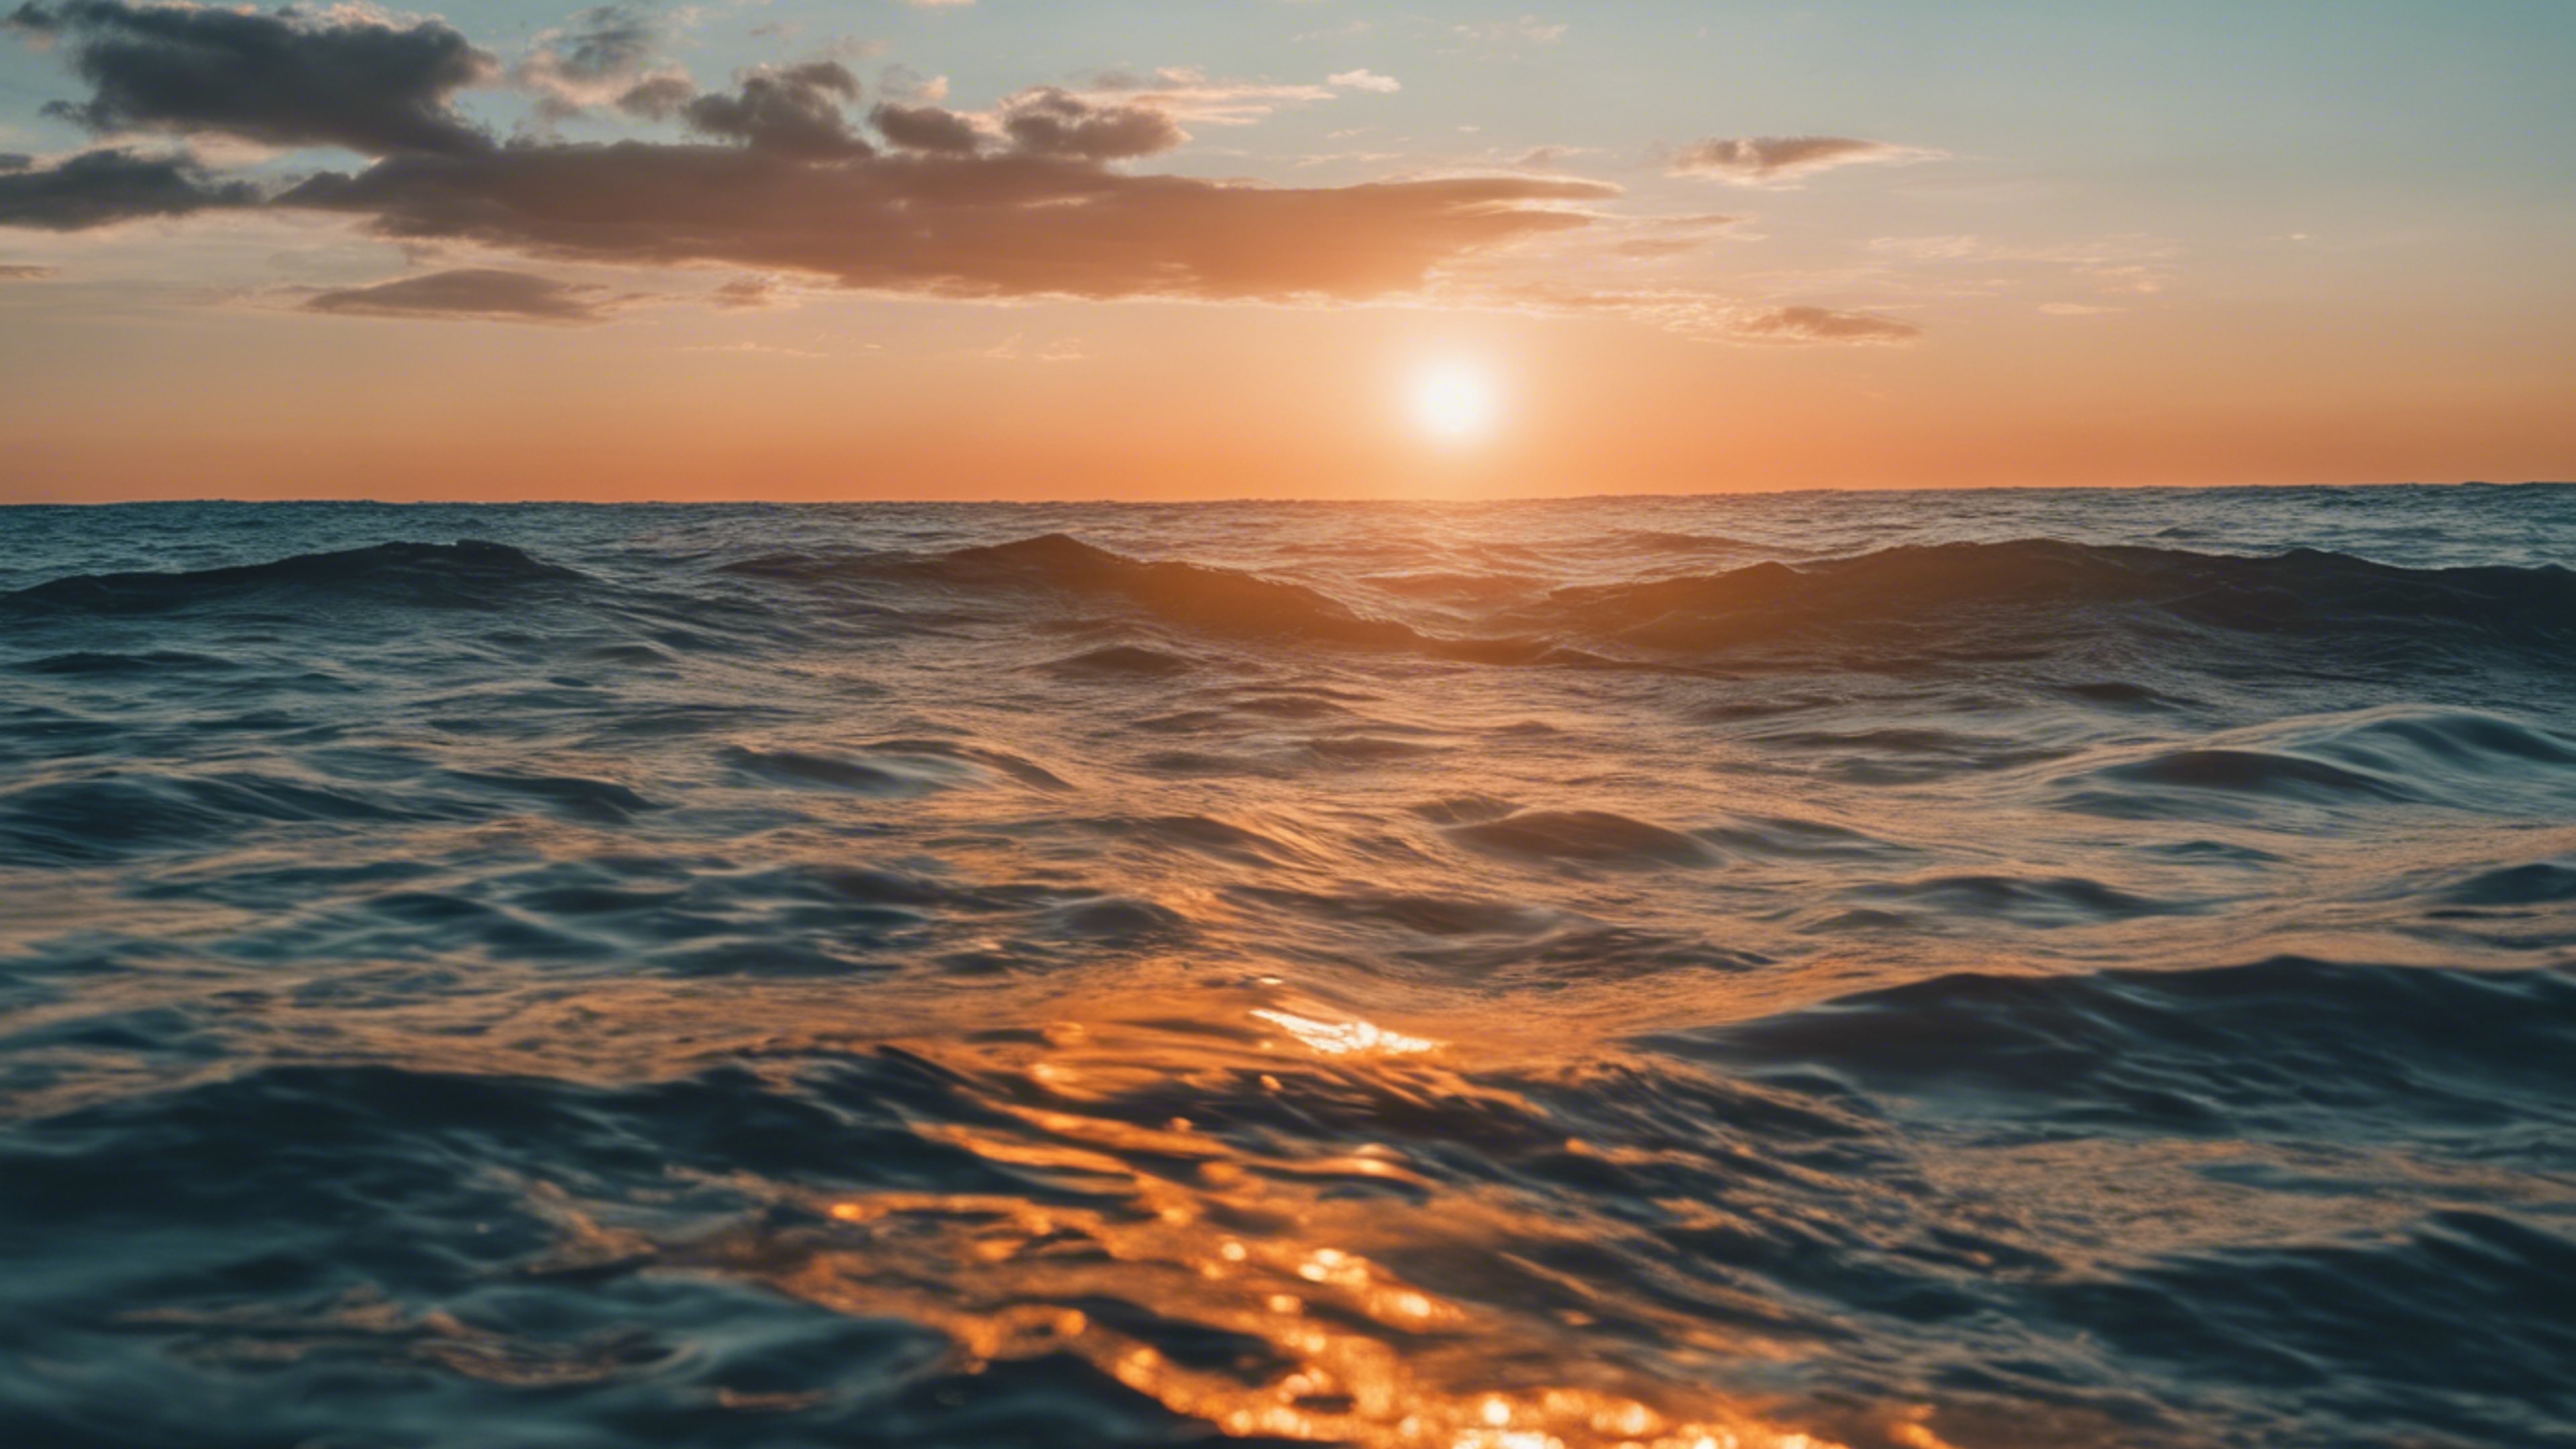 A sunset scene with orange sun setting in the cool blue ocean. Ფონი[7965154be6e2421b8d94]